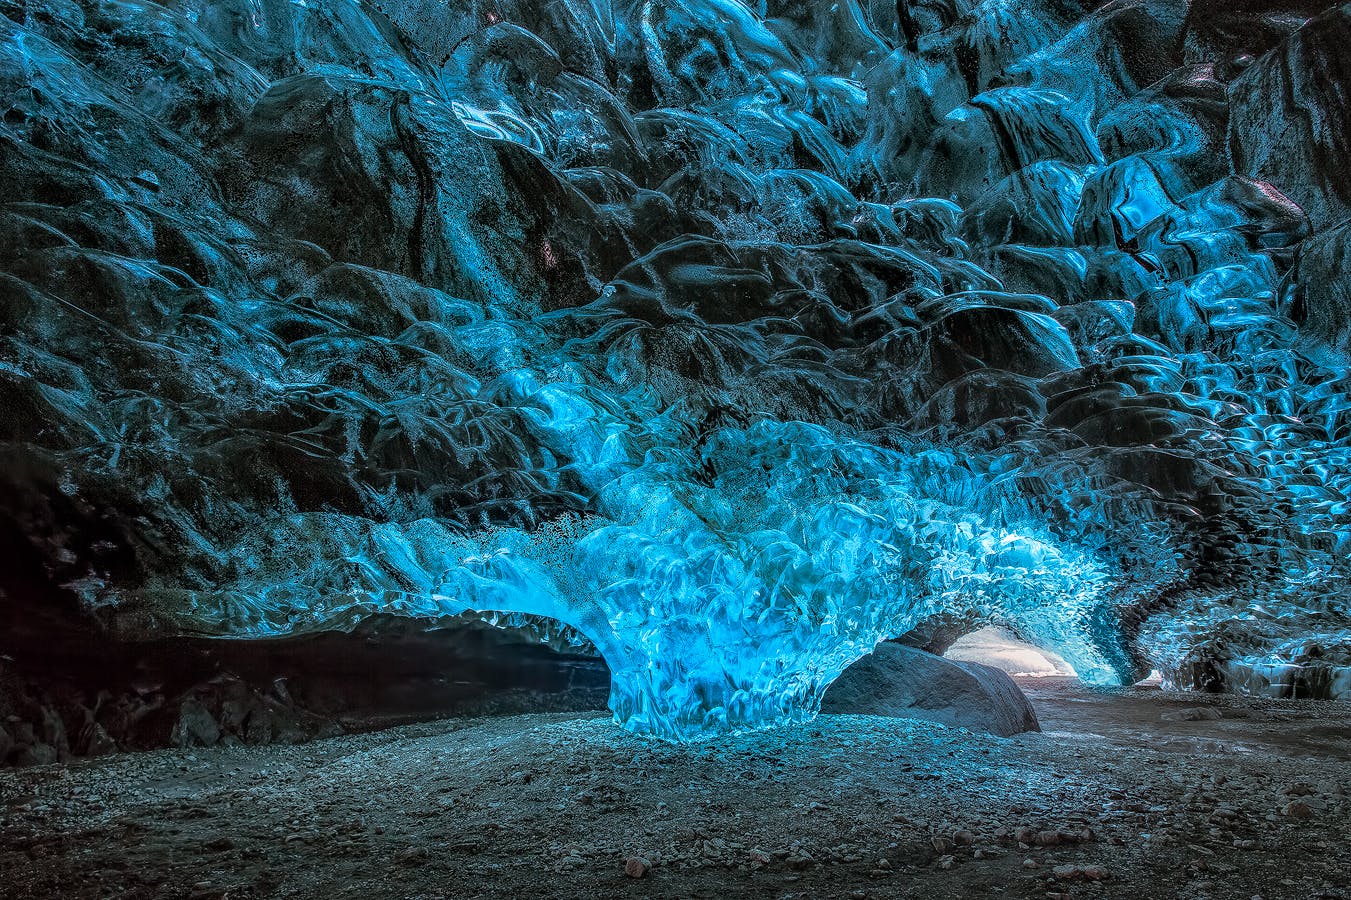 The glacier ice caves on Iceland's South Coast are amongst the country's most stunning natural features.